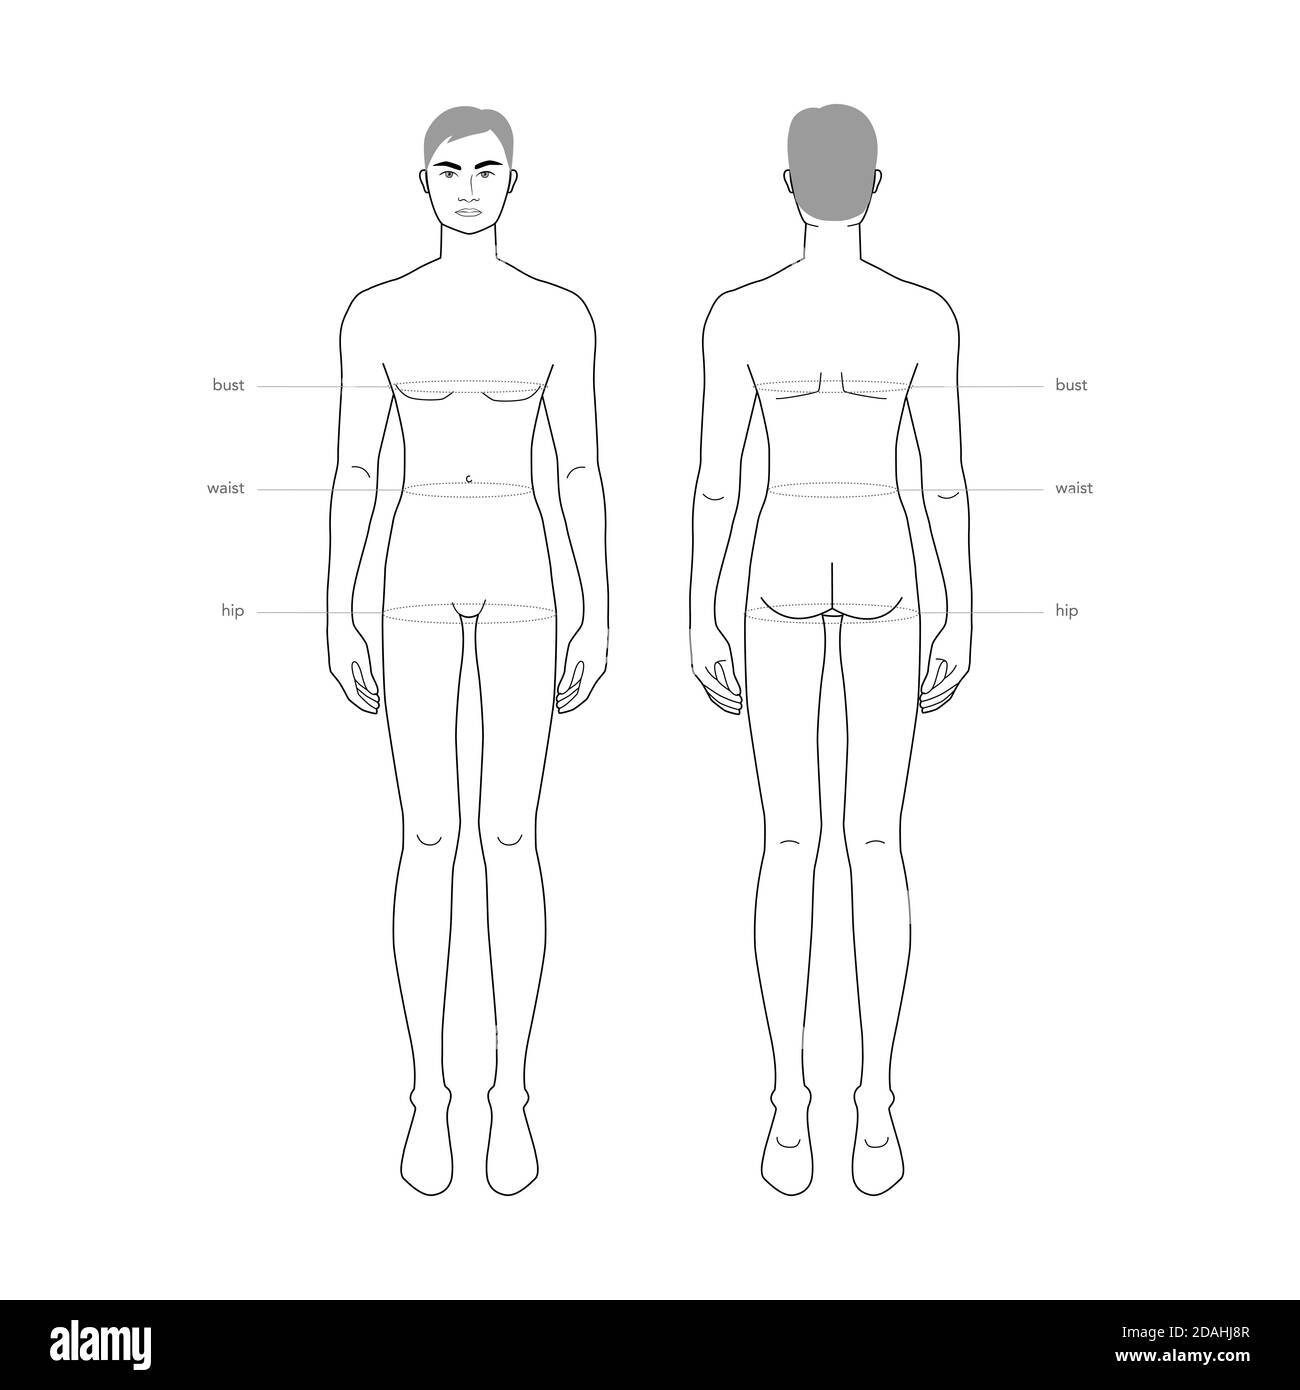 https://c8.alamy.com/comp/2DAHJ8R/men-standard-body-parts-terminology-measurements-illustration-for-clothes-and-accessories-production-fashion-male-size-chart-9-head-boy-for-site-and-online-shop-human-body-infographic-template-2DAHJ8R.jpg